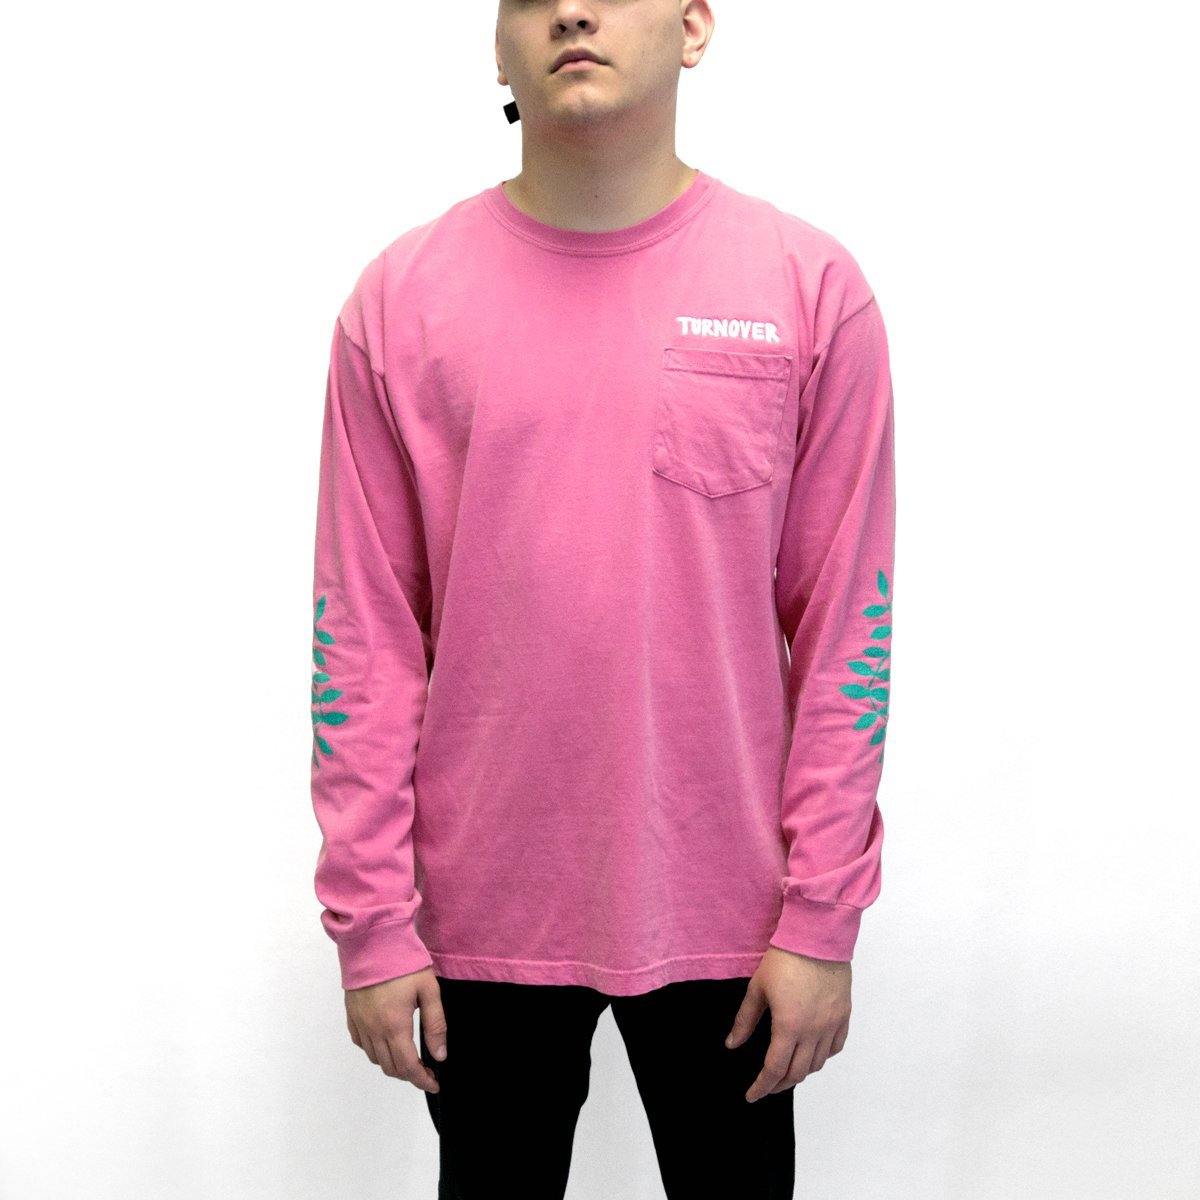 Buy – Turnover "Vines" Long Sleeve – Band & Music Merch – Cold Cuts Merch